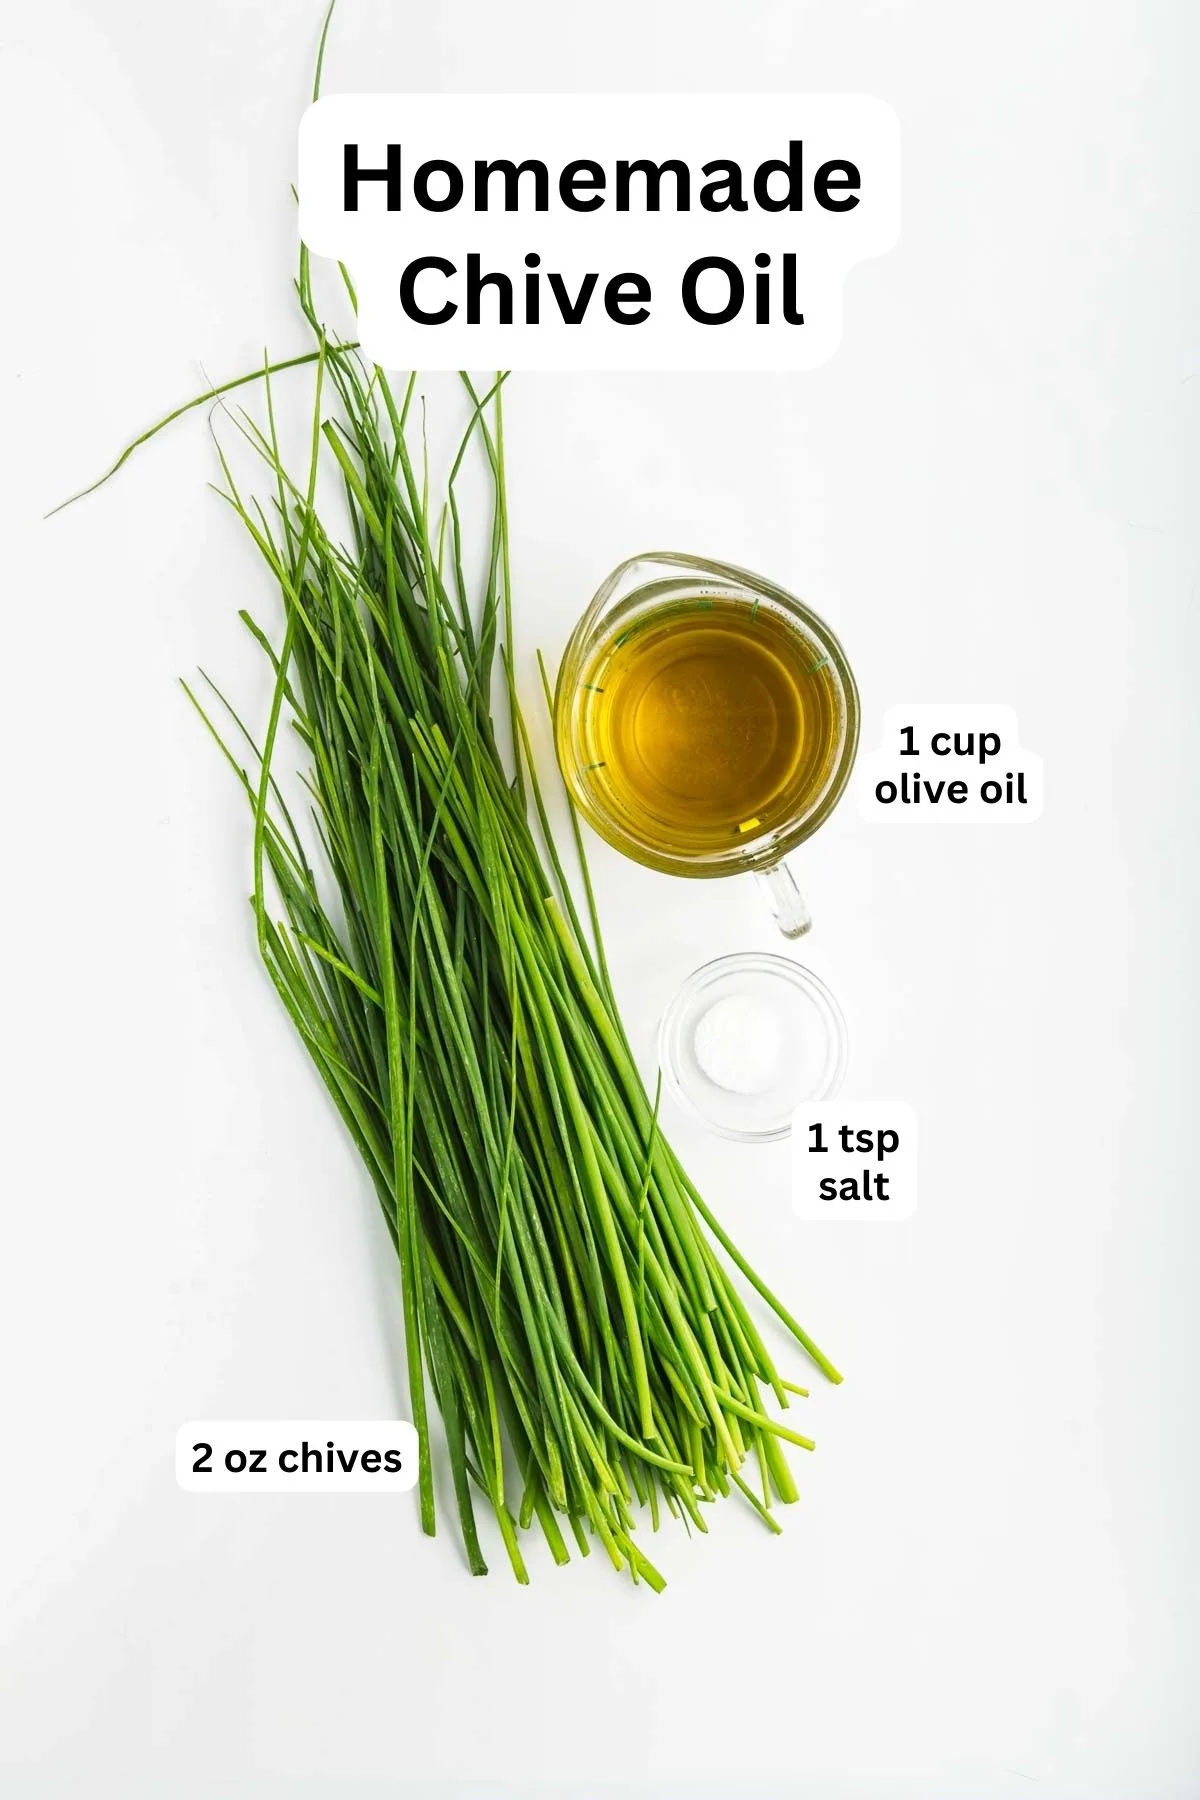 Ingredients to make chive oil